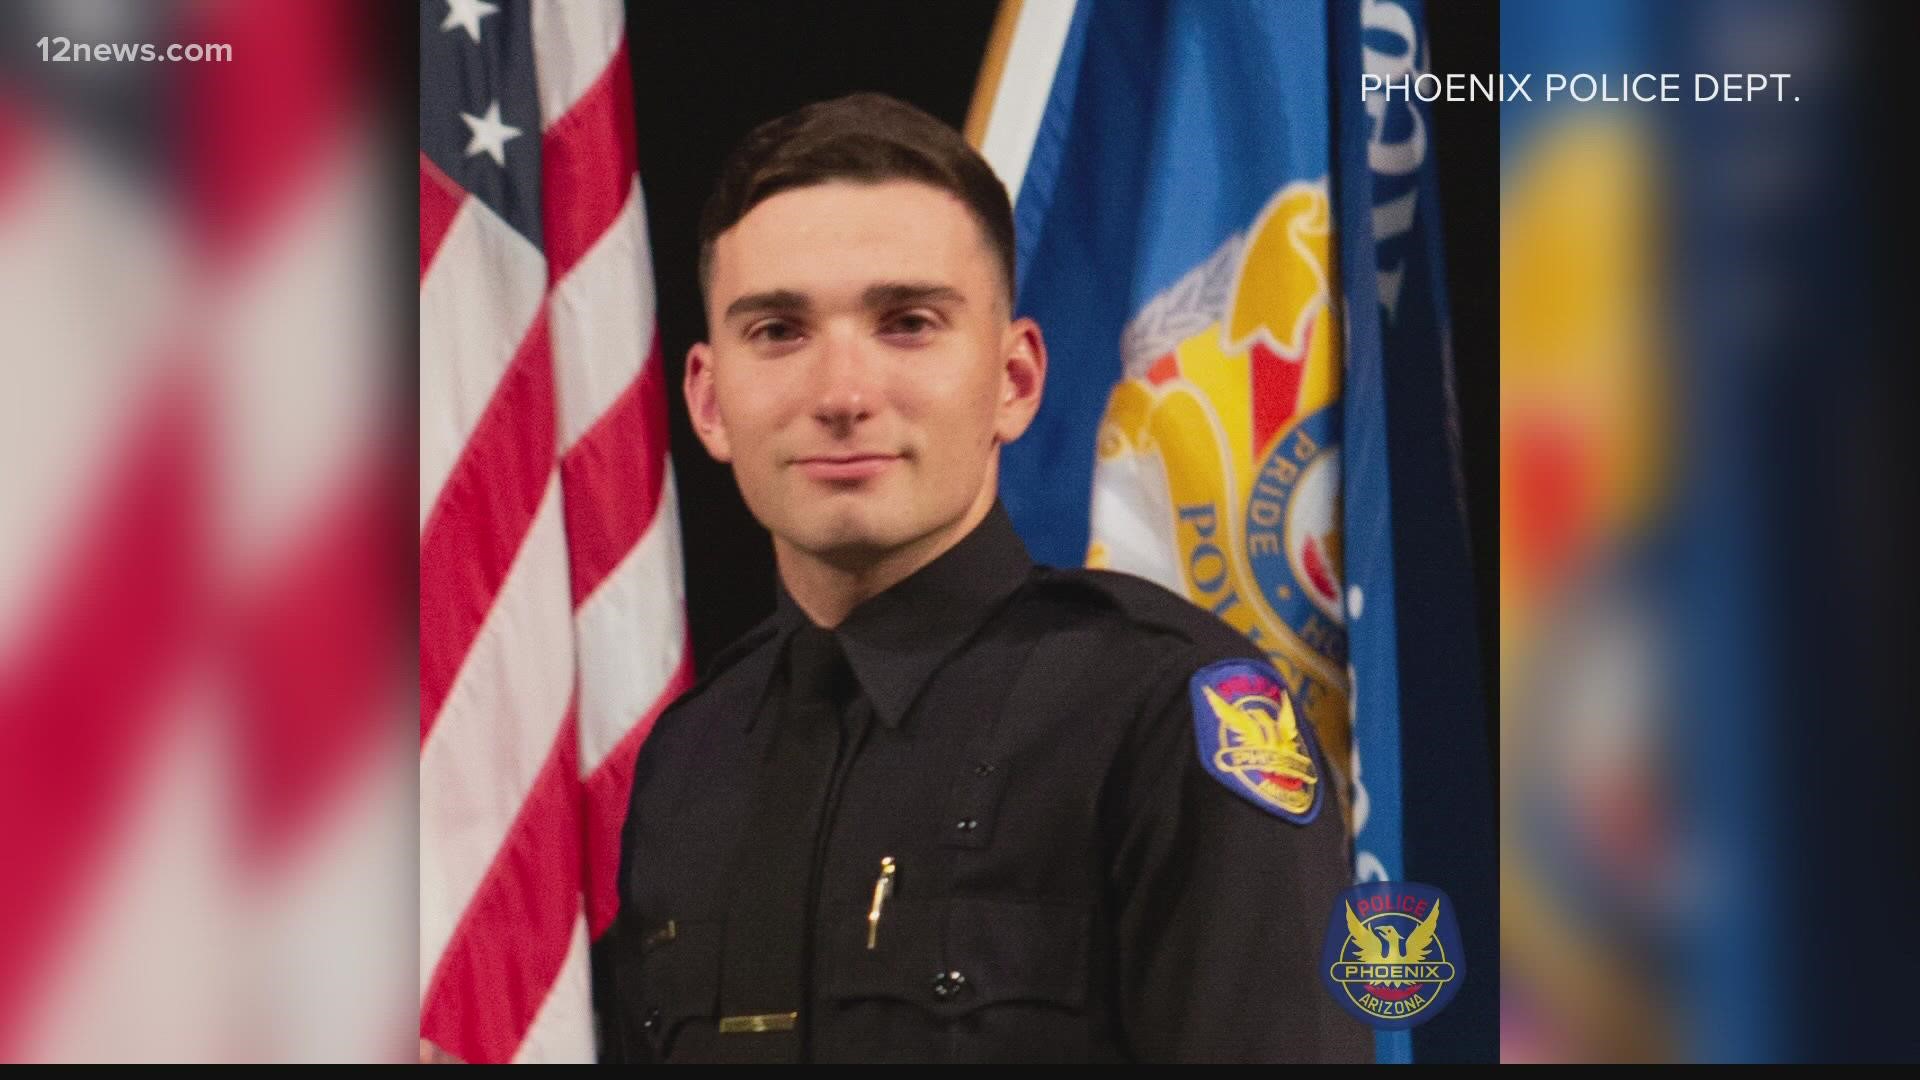 Phoenix Police Officer Tyler Moldovan, who was on life support after being shot eight times, has been released from the hospital, according to Phoenix police.